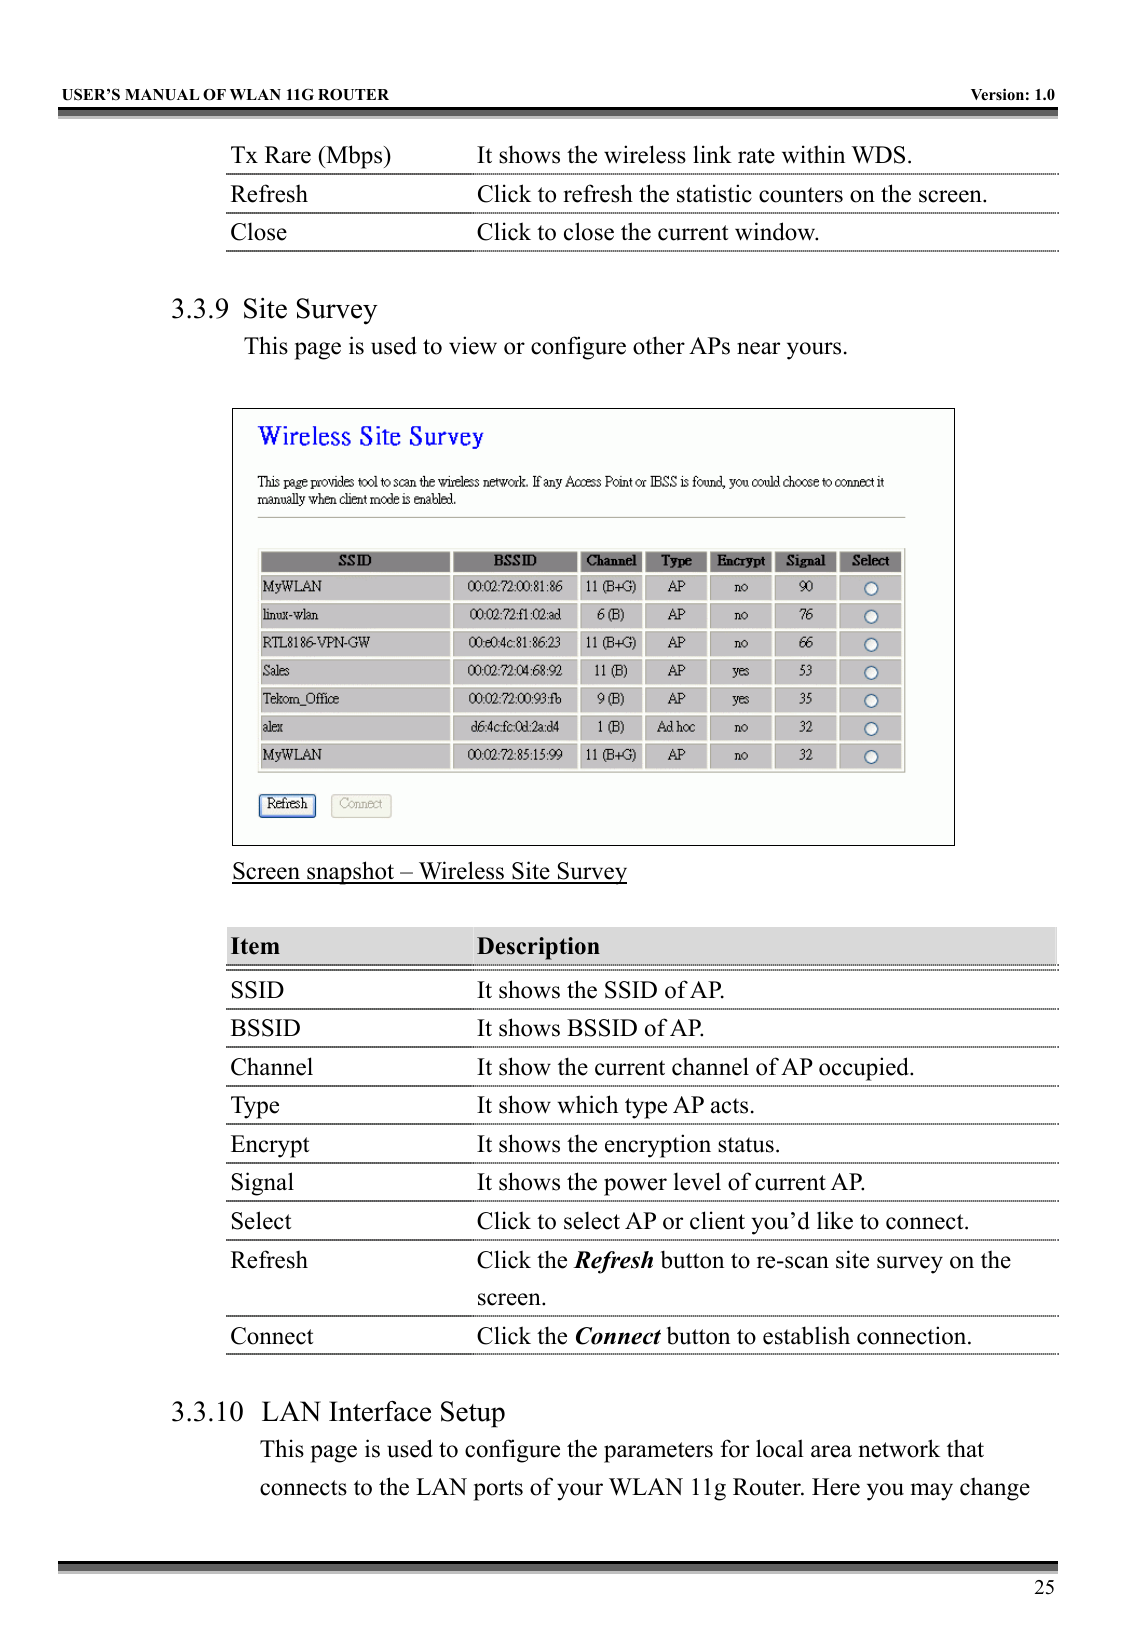   USER’S MANUAL OF WLAN 11G ROUTER    Version: 1.0     25 Tx Rare (Mbps)  It shows the wireless link rate within WDS. Refresh  Click to refresh the statistic counters on the screen. Close  Click to close the current window.  3.3.9 Site Survey This page is used to view or configure other APs near yours.   Screen snapshot – Wireless Site Survey  Item  Description   SSID  It shows the SSID of AP. BSSID  It shows BSSID of AP. Channel  It show the current channel of AP occupied. Type  It show which type AP acts. Encrypt  It shows the encryption status. Signal  It shows the power level of current AP. Select  Click to select AP or client you’d like to connect. Refresh Click the Refresh button to re-scan site survey on the screen. Connect Click the Connect button to establish connection.  3.3.10  LAN Interface Setup This page is used to configure the parameters for local area network that connects to the LAN ports of your WLAN 11g Router. Here you may change 